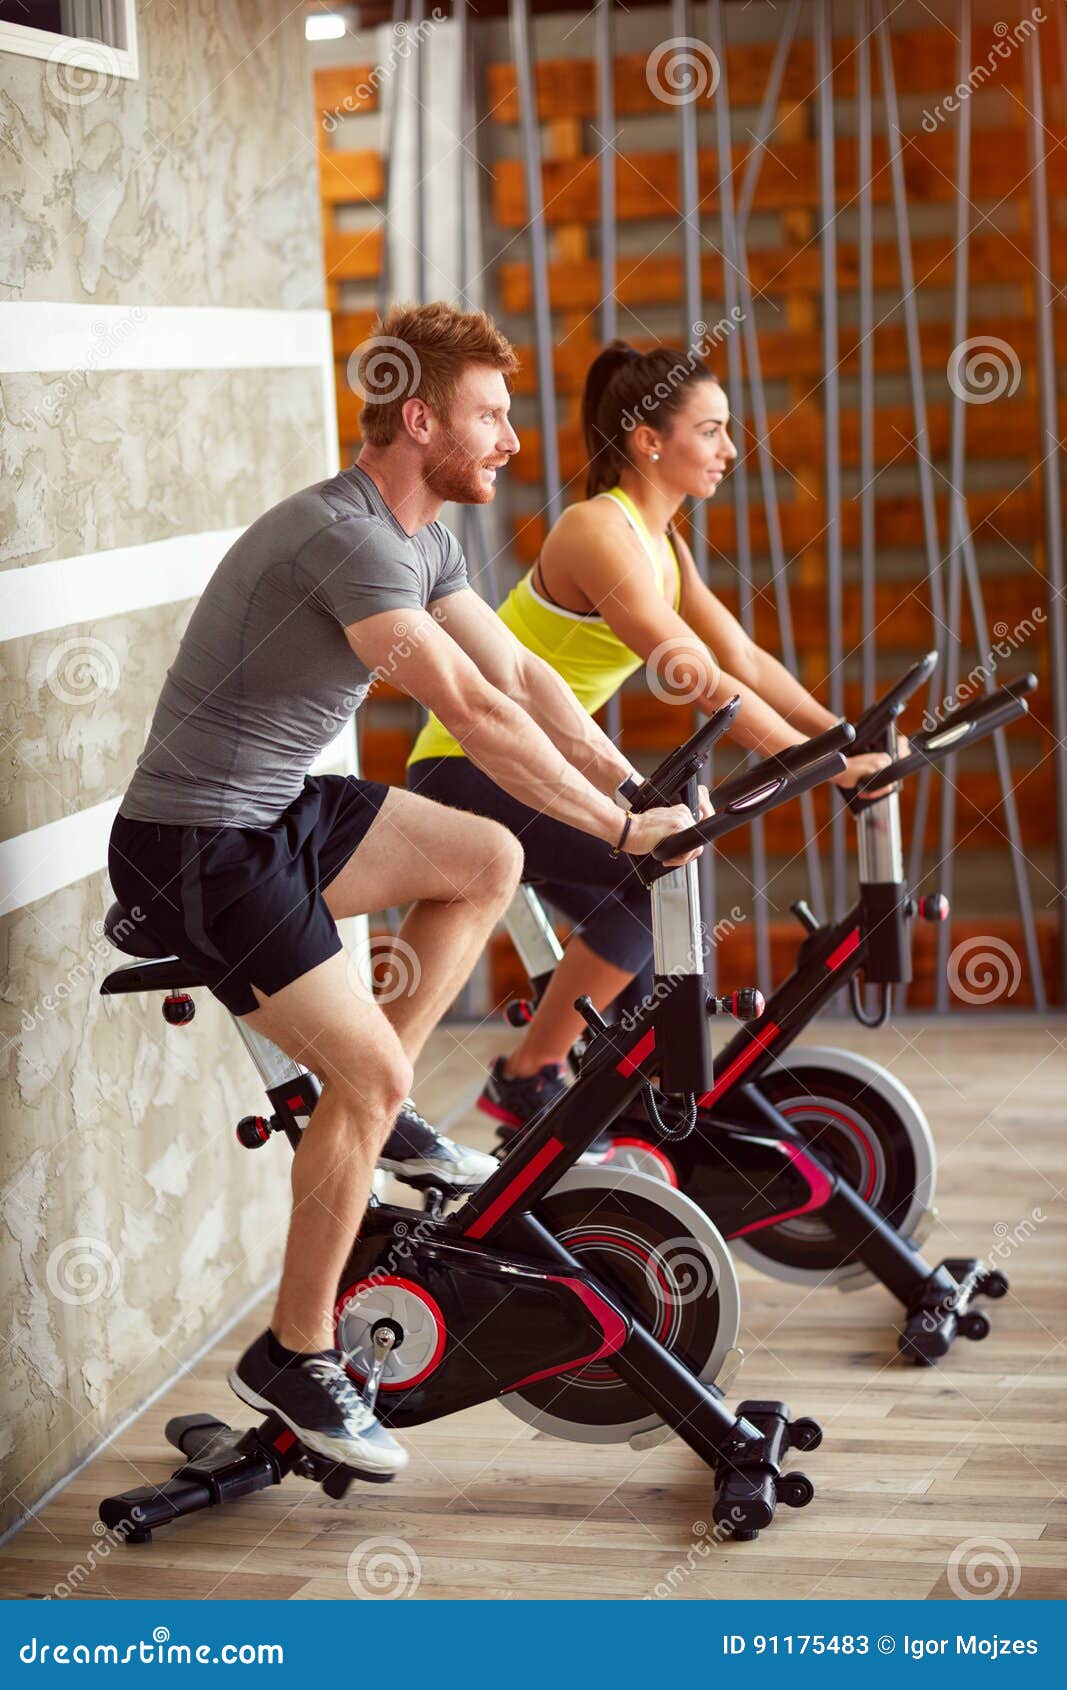 couple trains on bike in gym